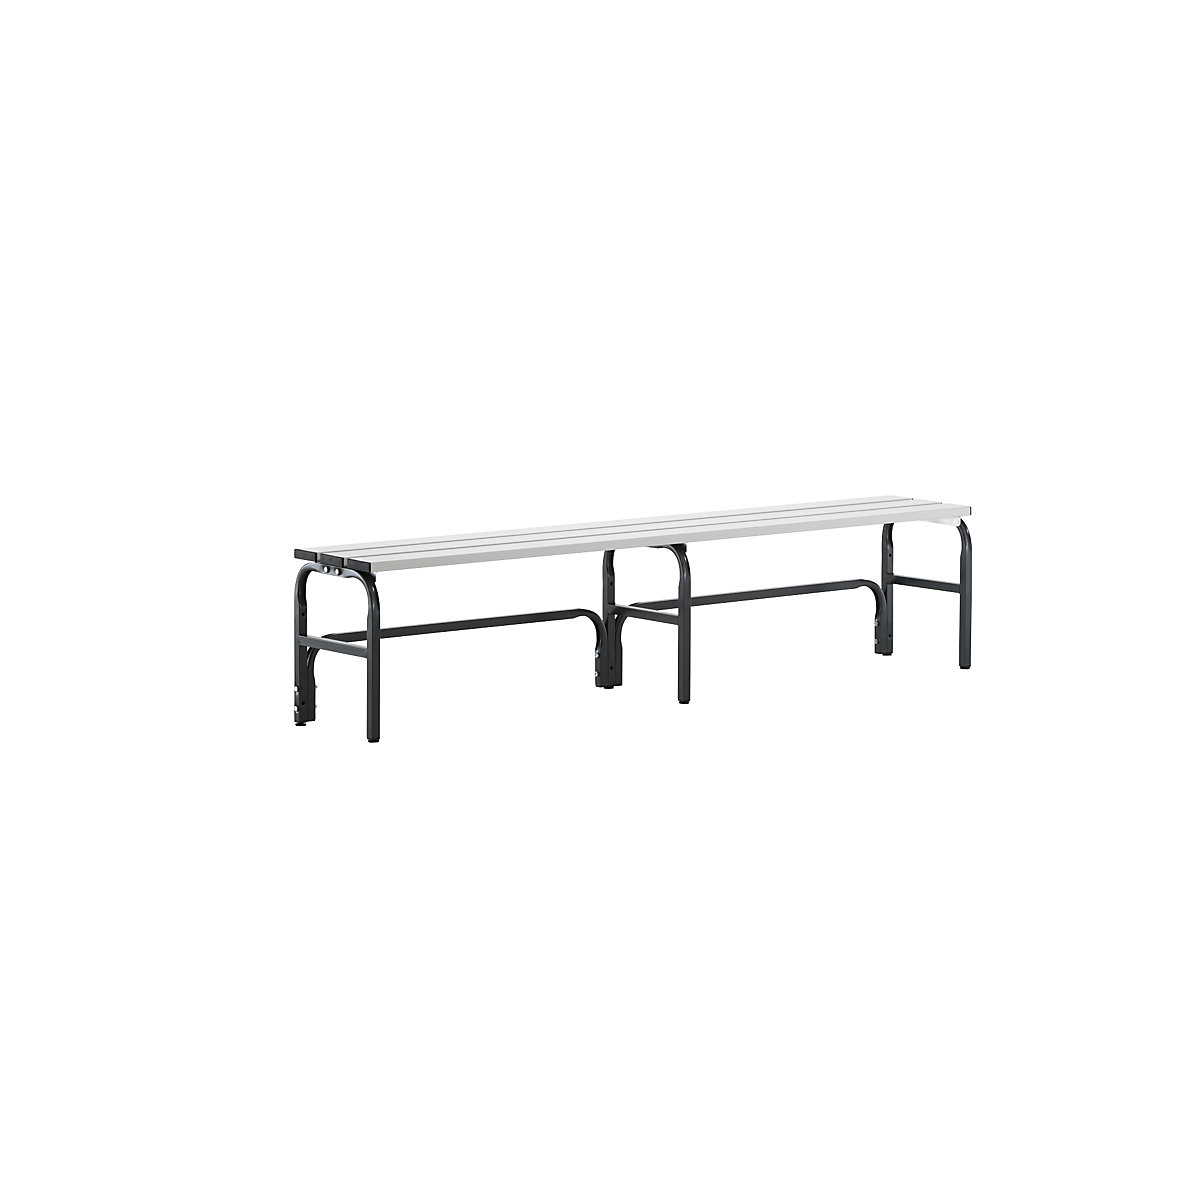 Changing room bench with aluminium slats – Sypro, HxD 450 x 350 mm, length 1500 mm, charcoal-7